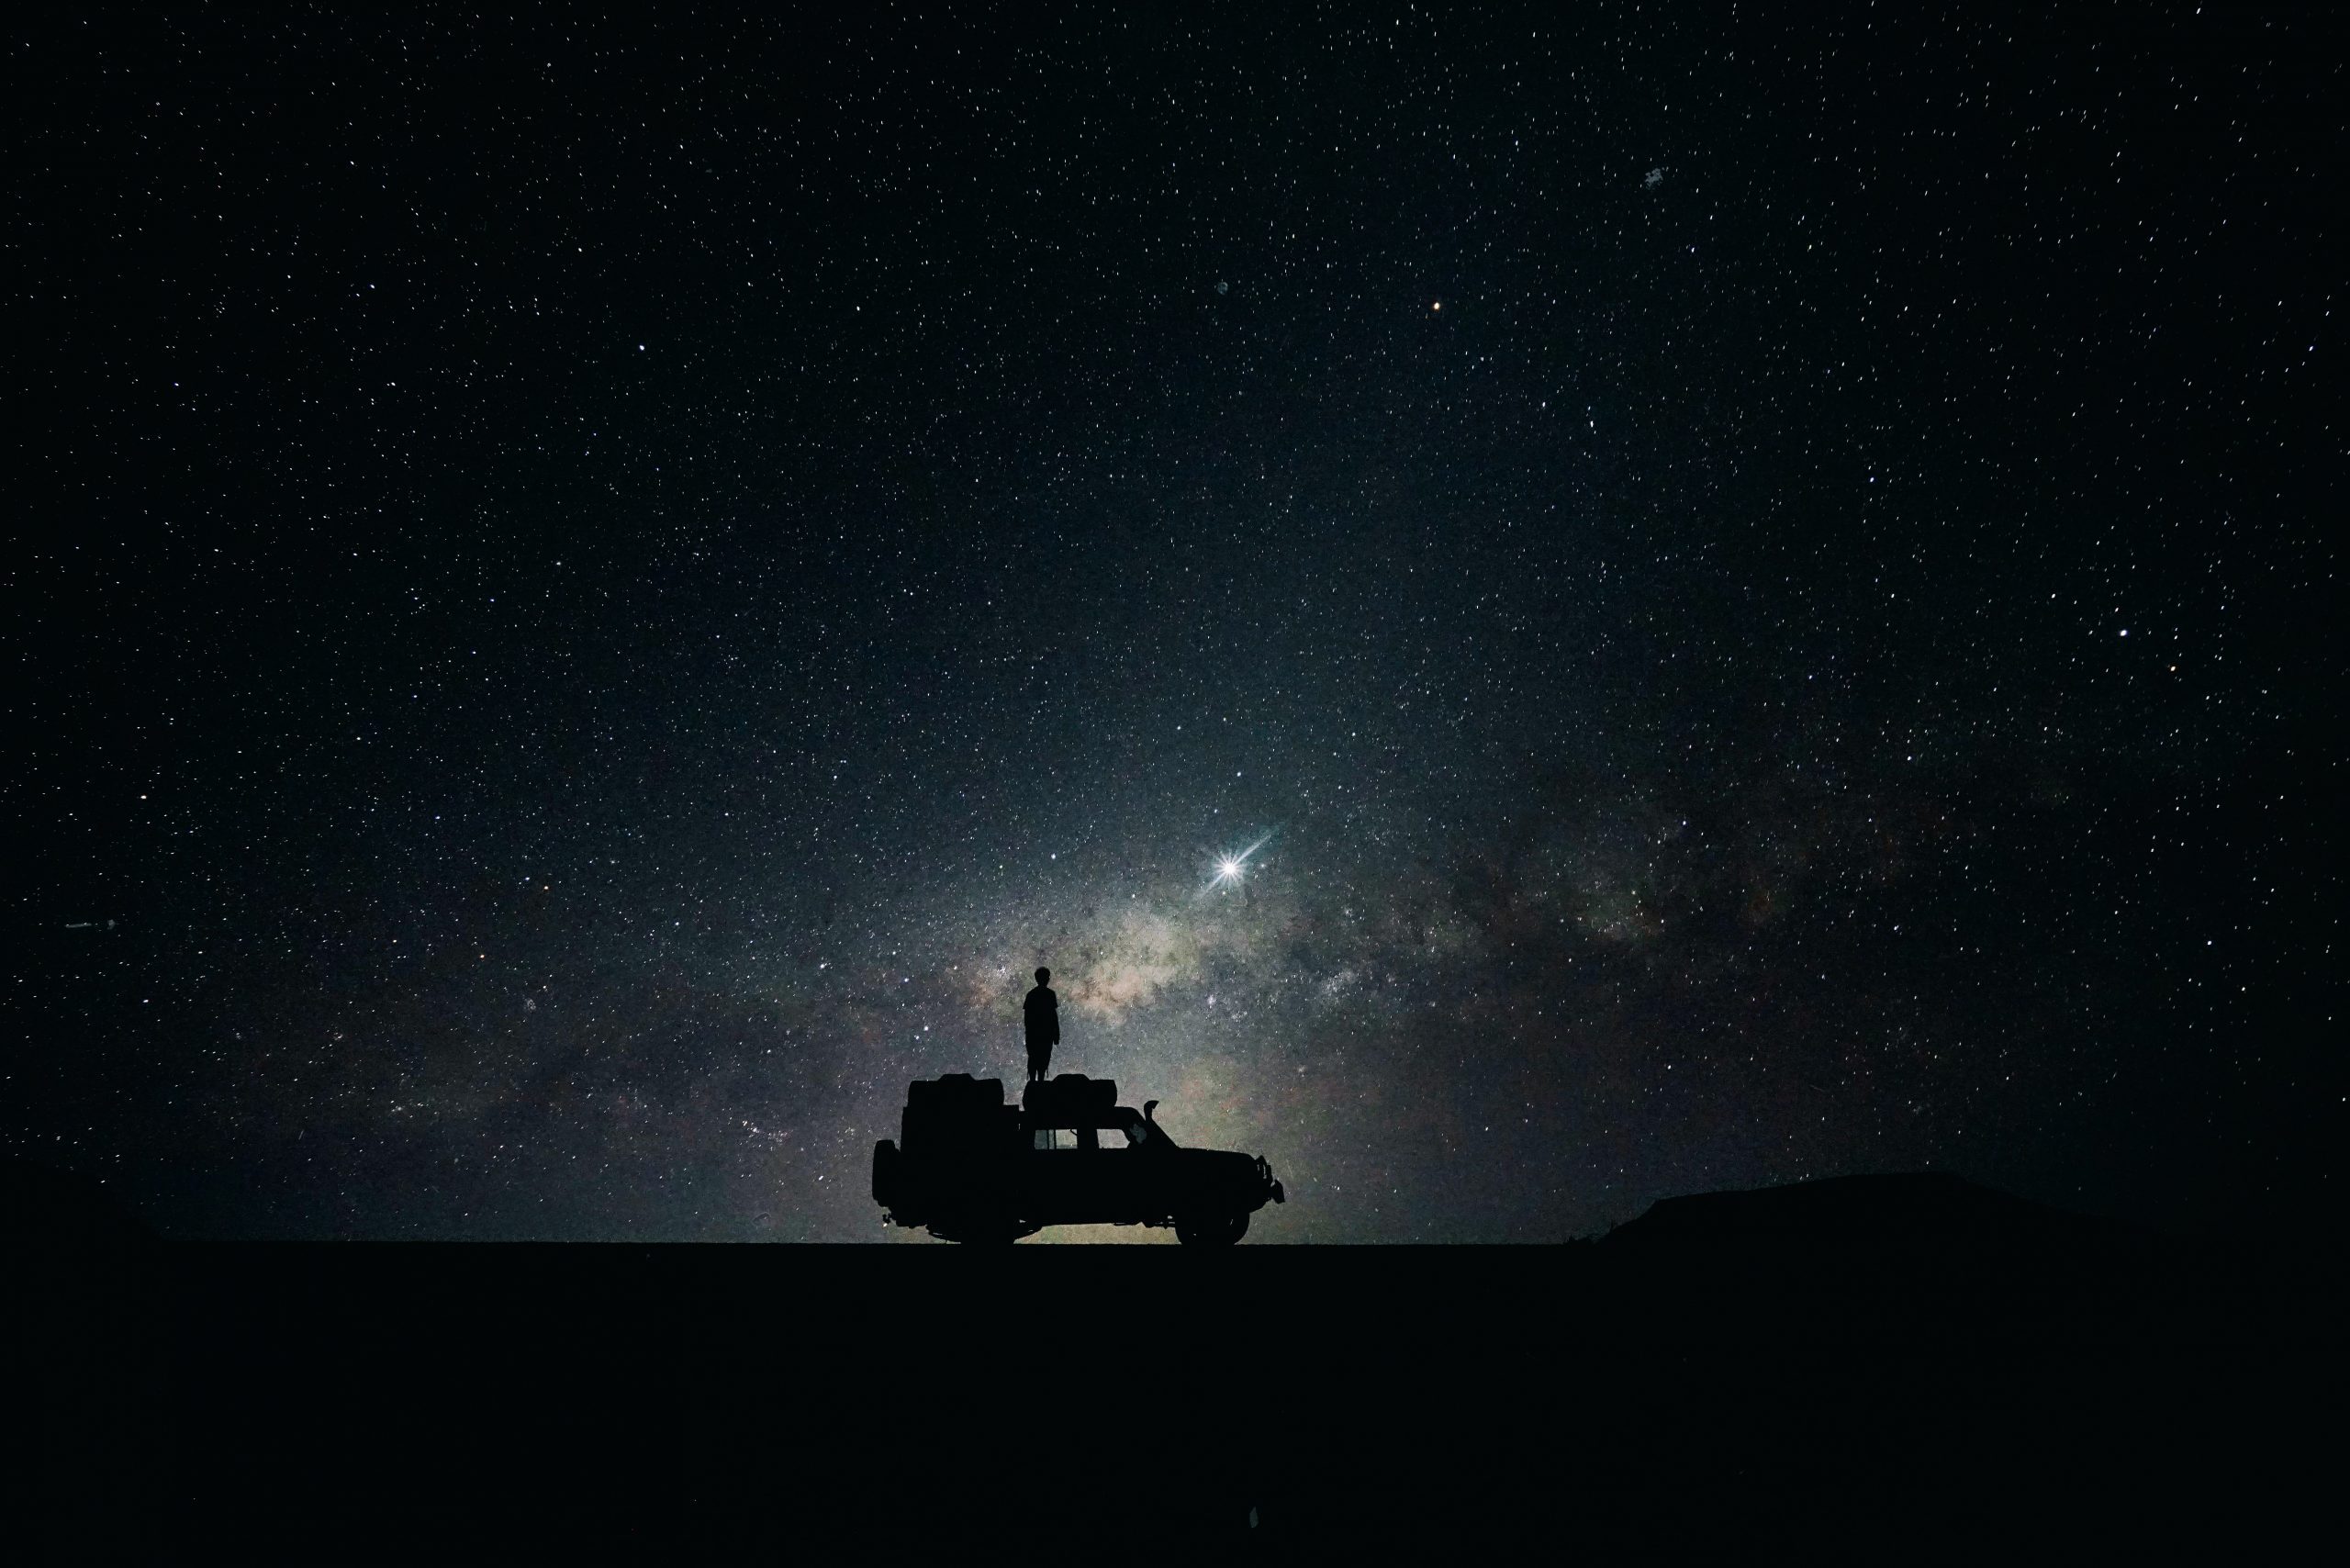 Silhouette of man standing on car in front of night sky